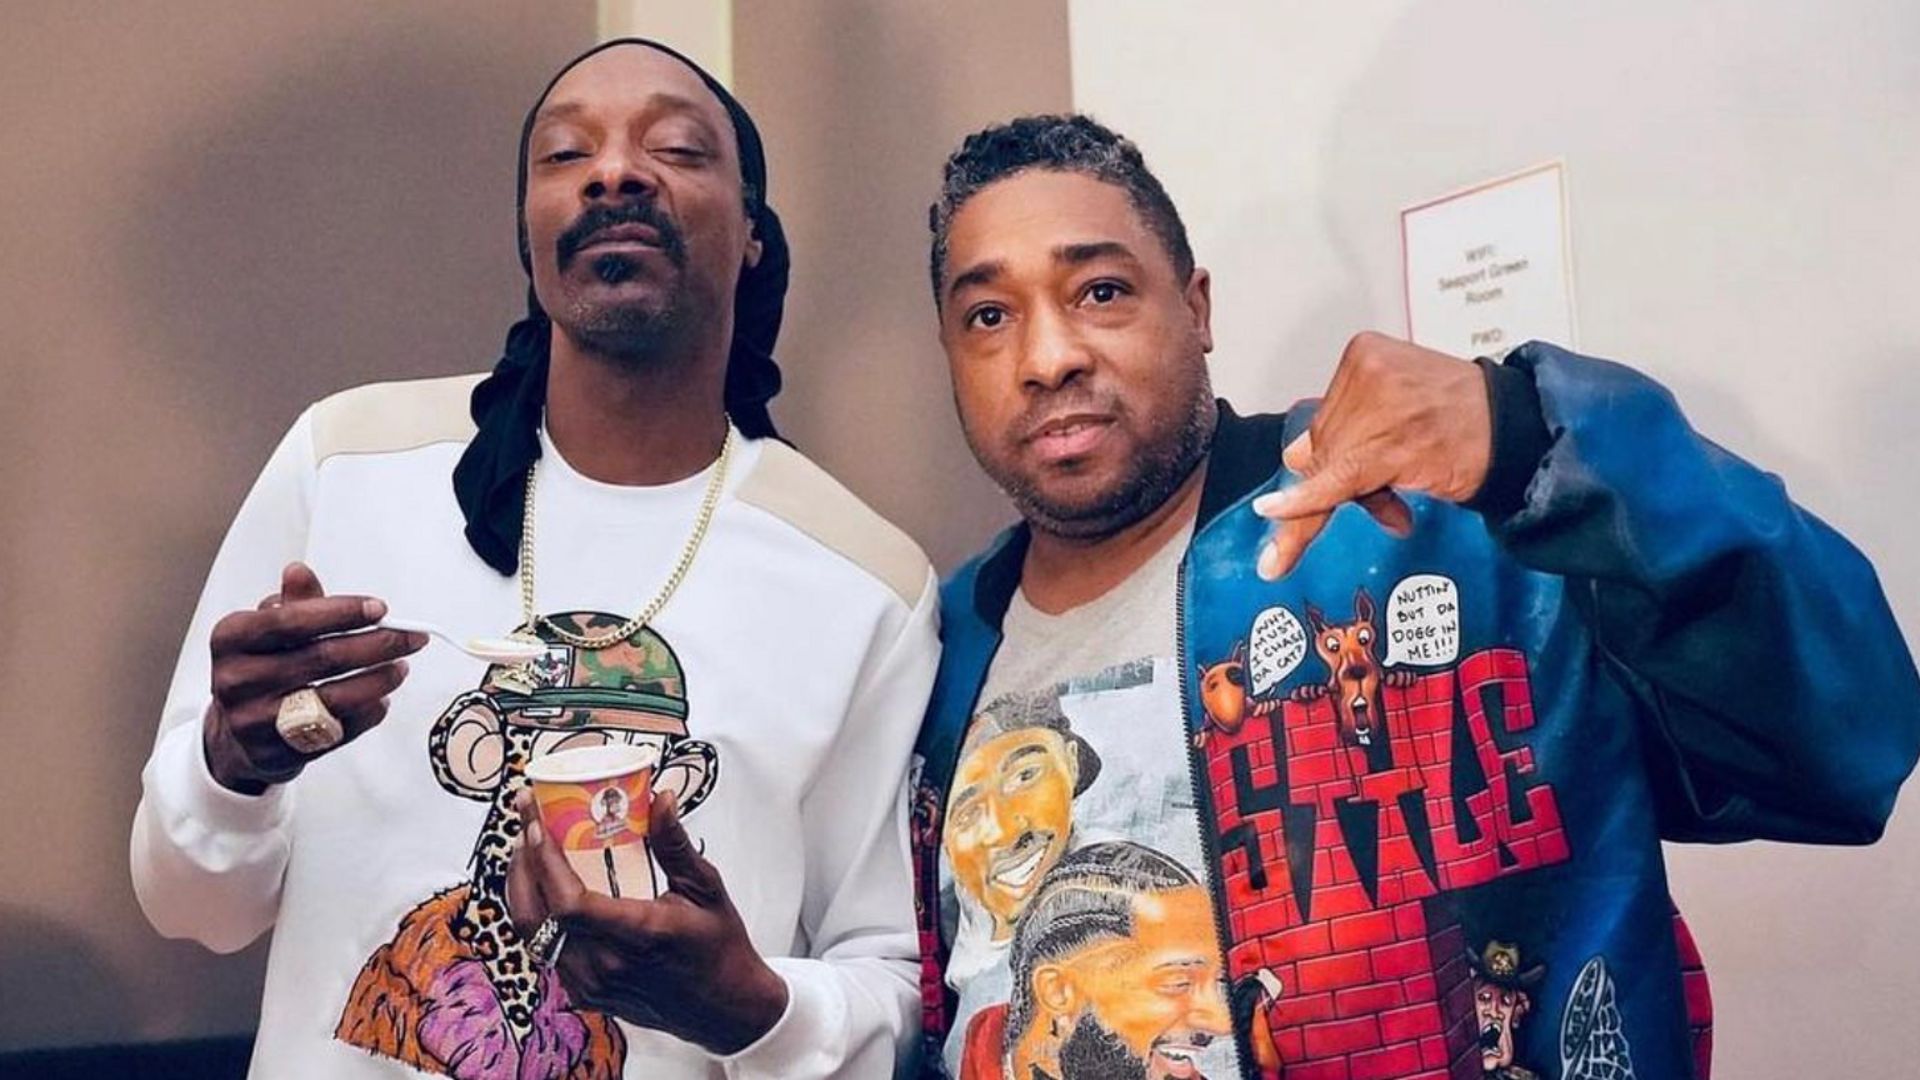 Snoop and his brother Bing